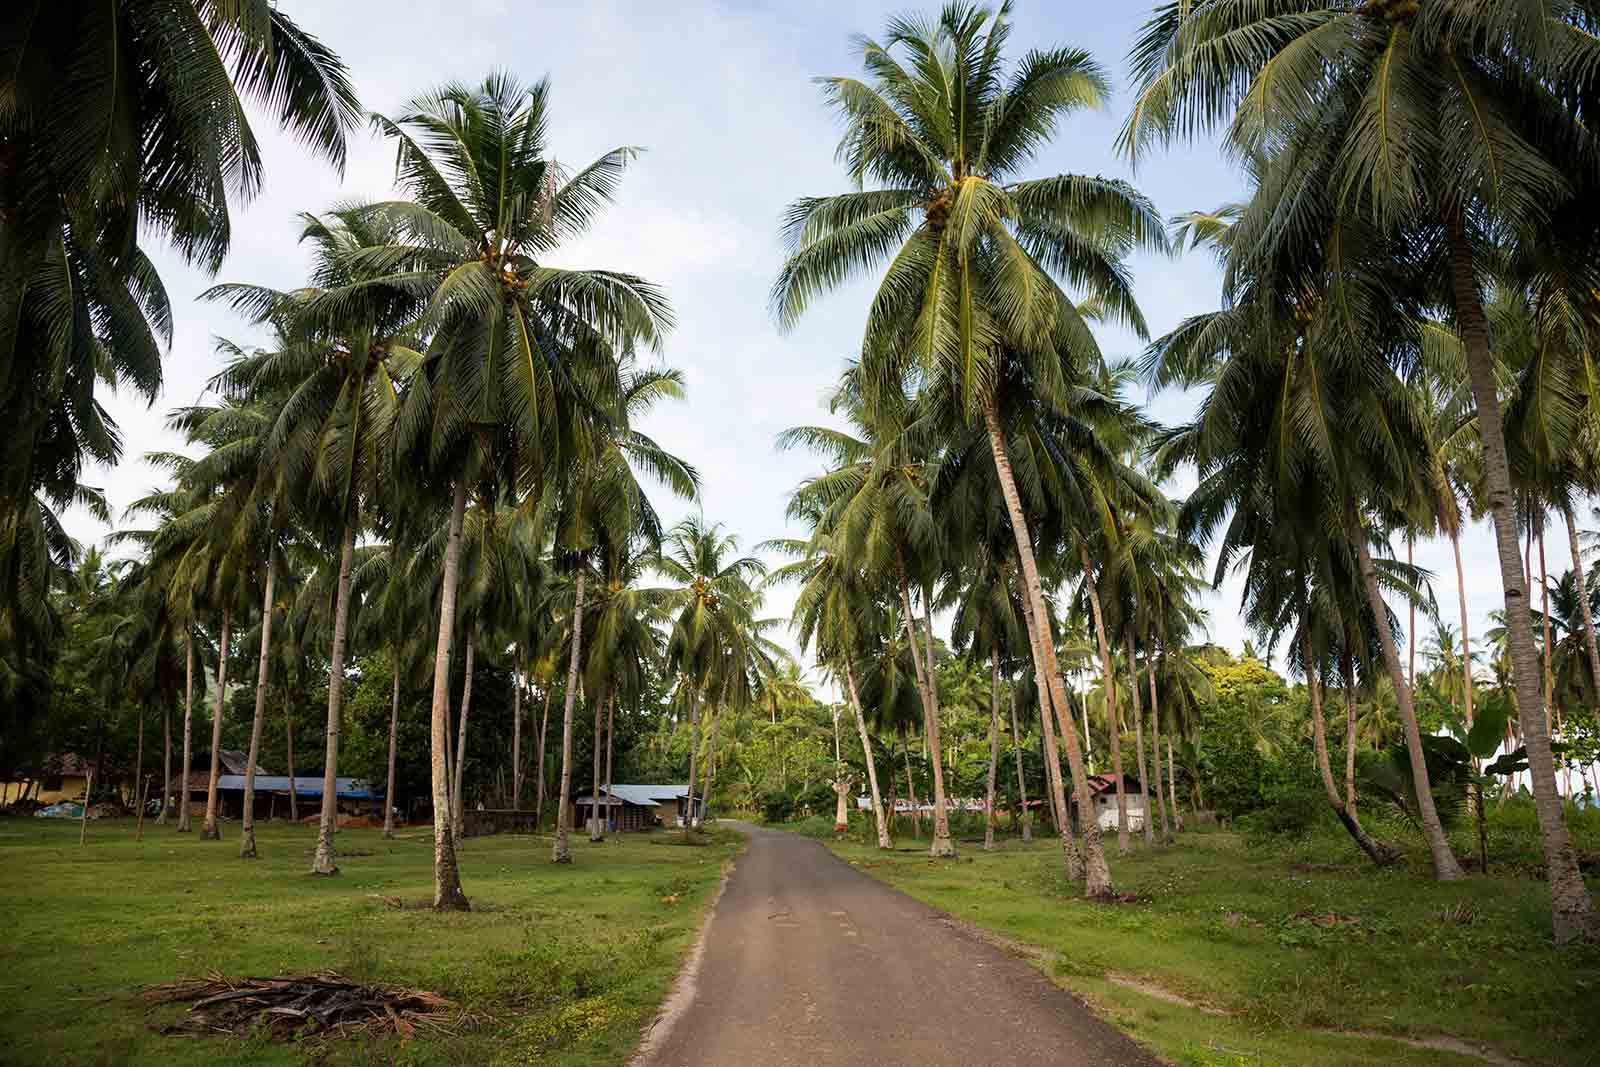 Maluku Islands: The way down south on Ambon islands lead us through several beautiful palm tree alleys.